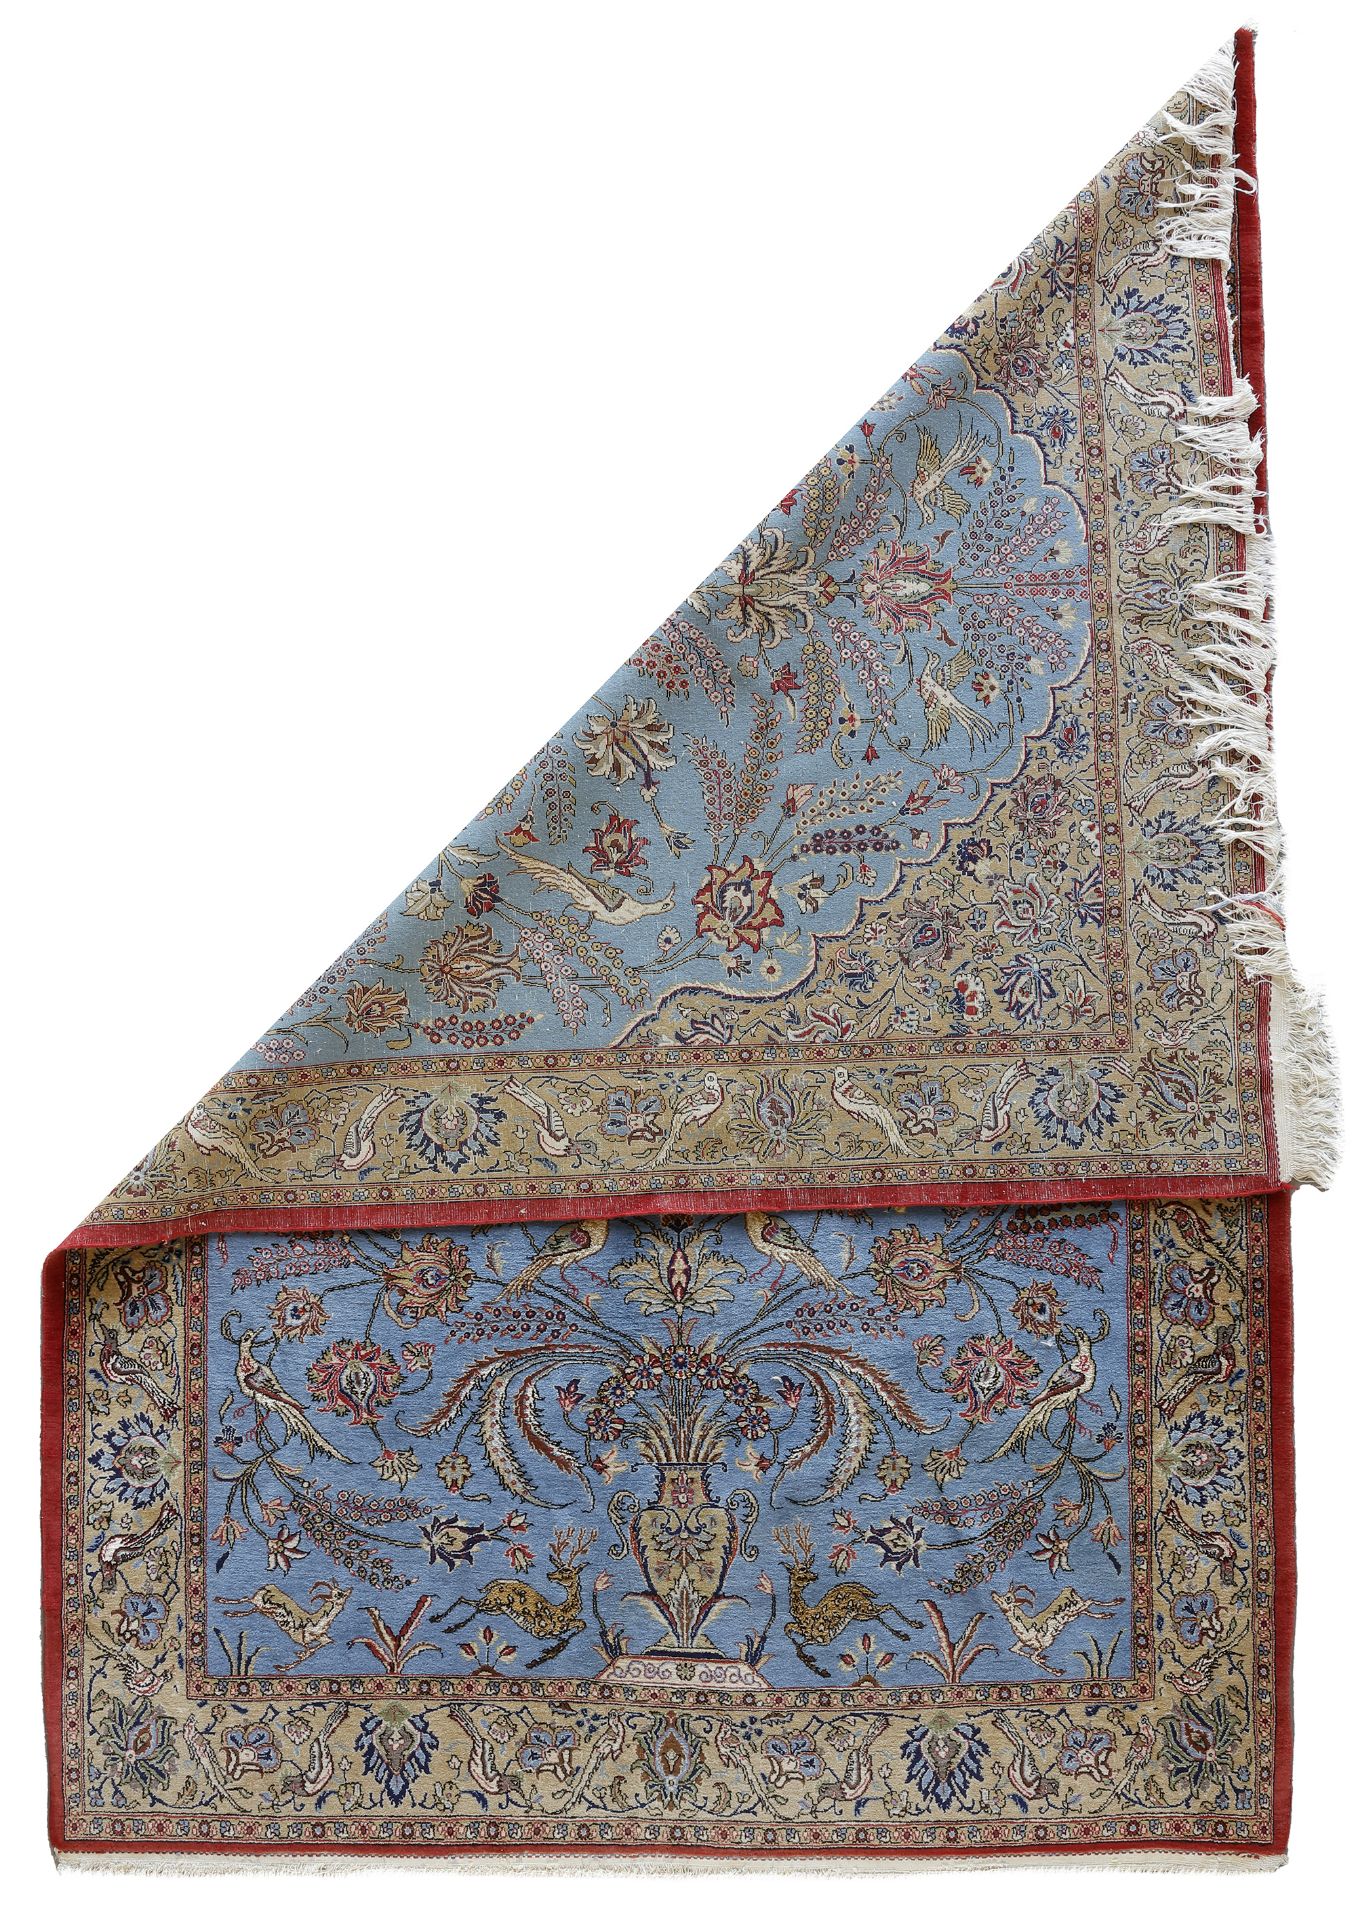 A PERSIAN THERAN CARPET, FIRST HALF 20TH CENTURY - Image 2 of 2